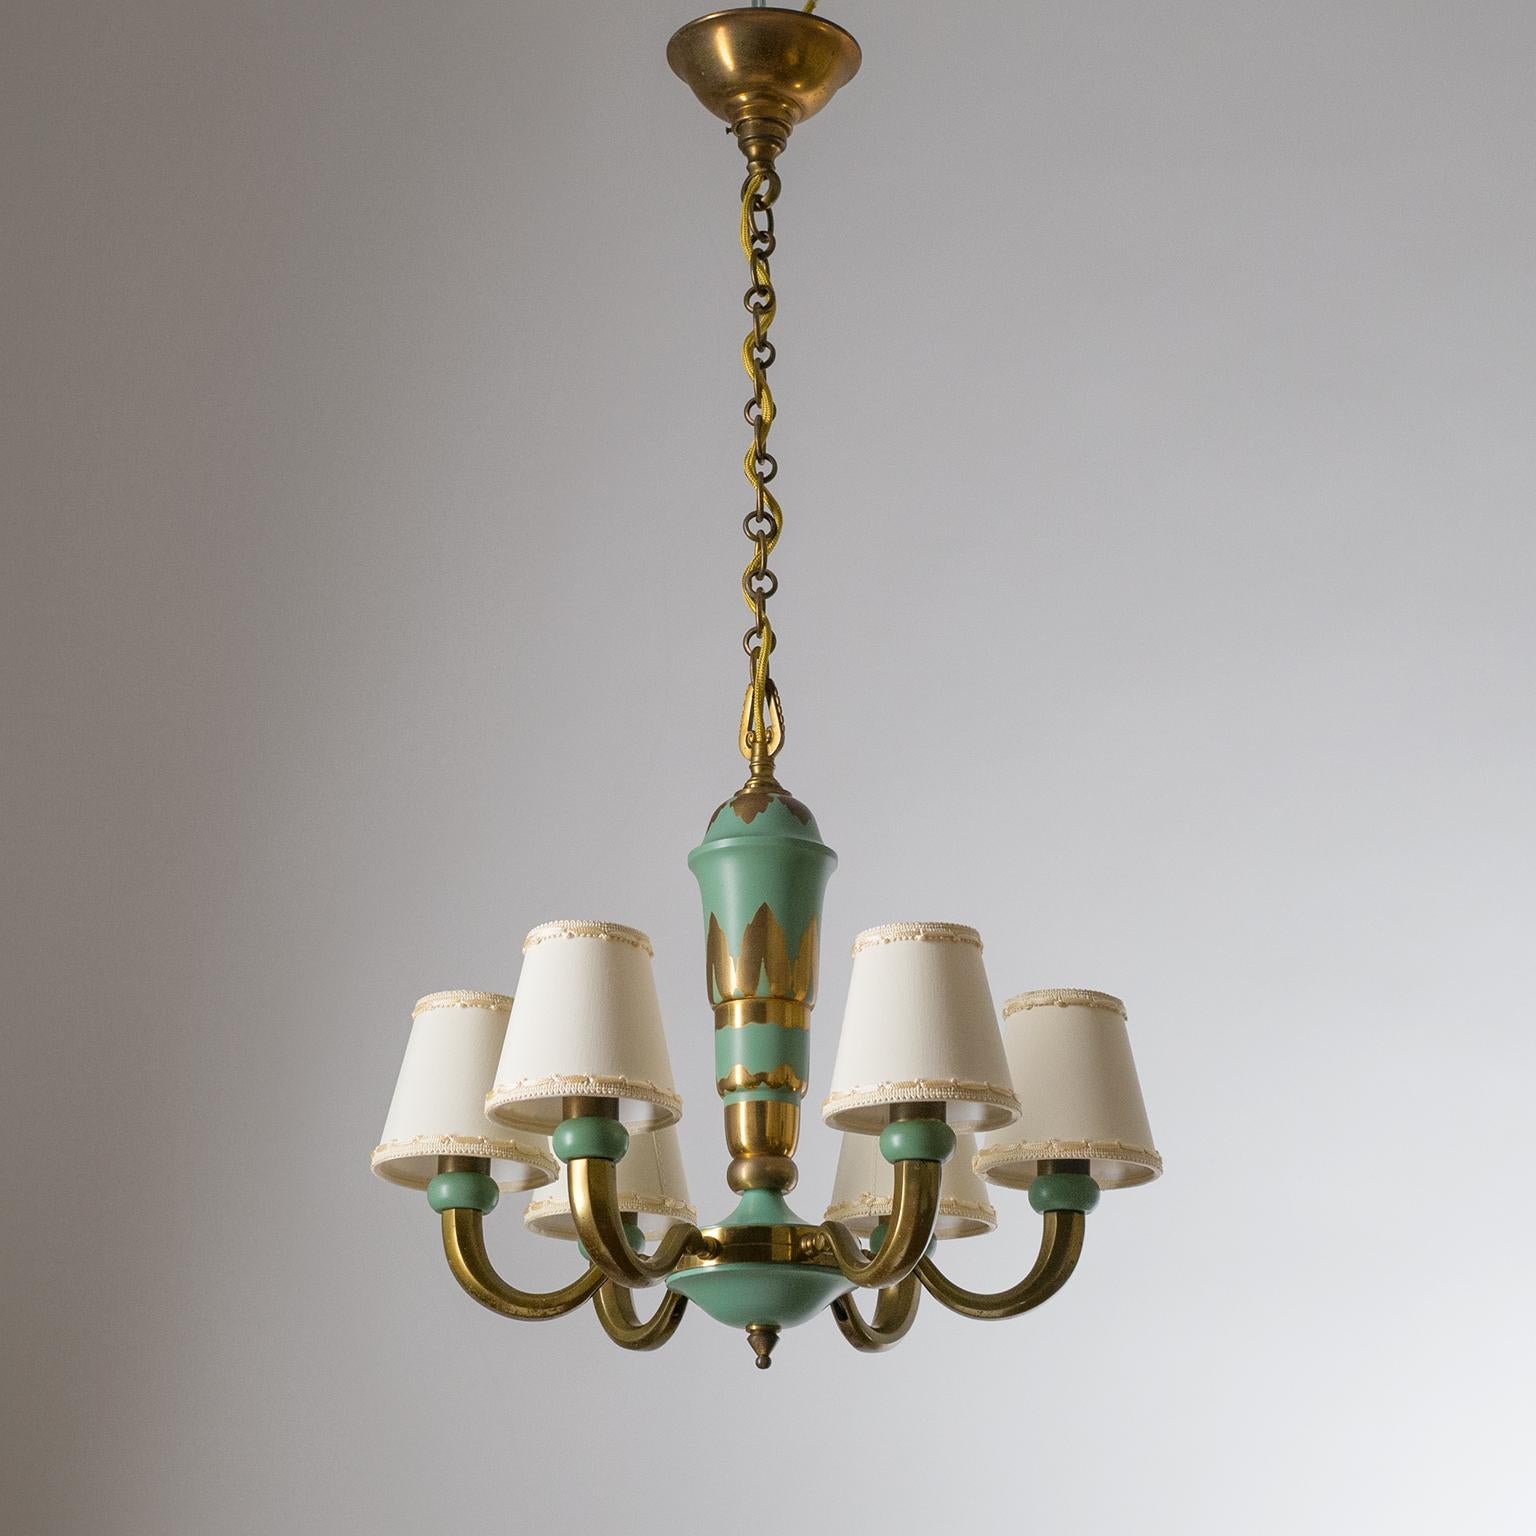 Fine French Art Deco chandelier from the 1930-1940s. All brass construction, partially enameled in a subdued green. Very nice condition with some patina on the brass and minor wear to the original lacquer. Brass and ceramic E14 sockets with new